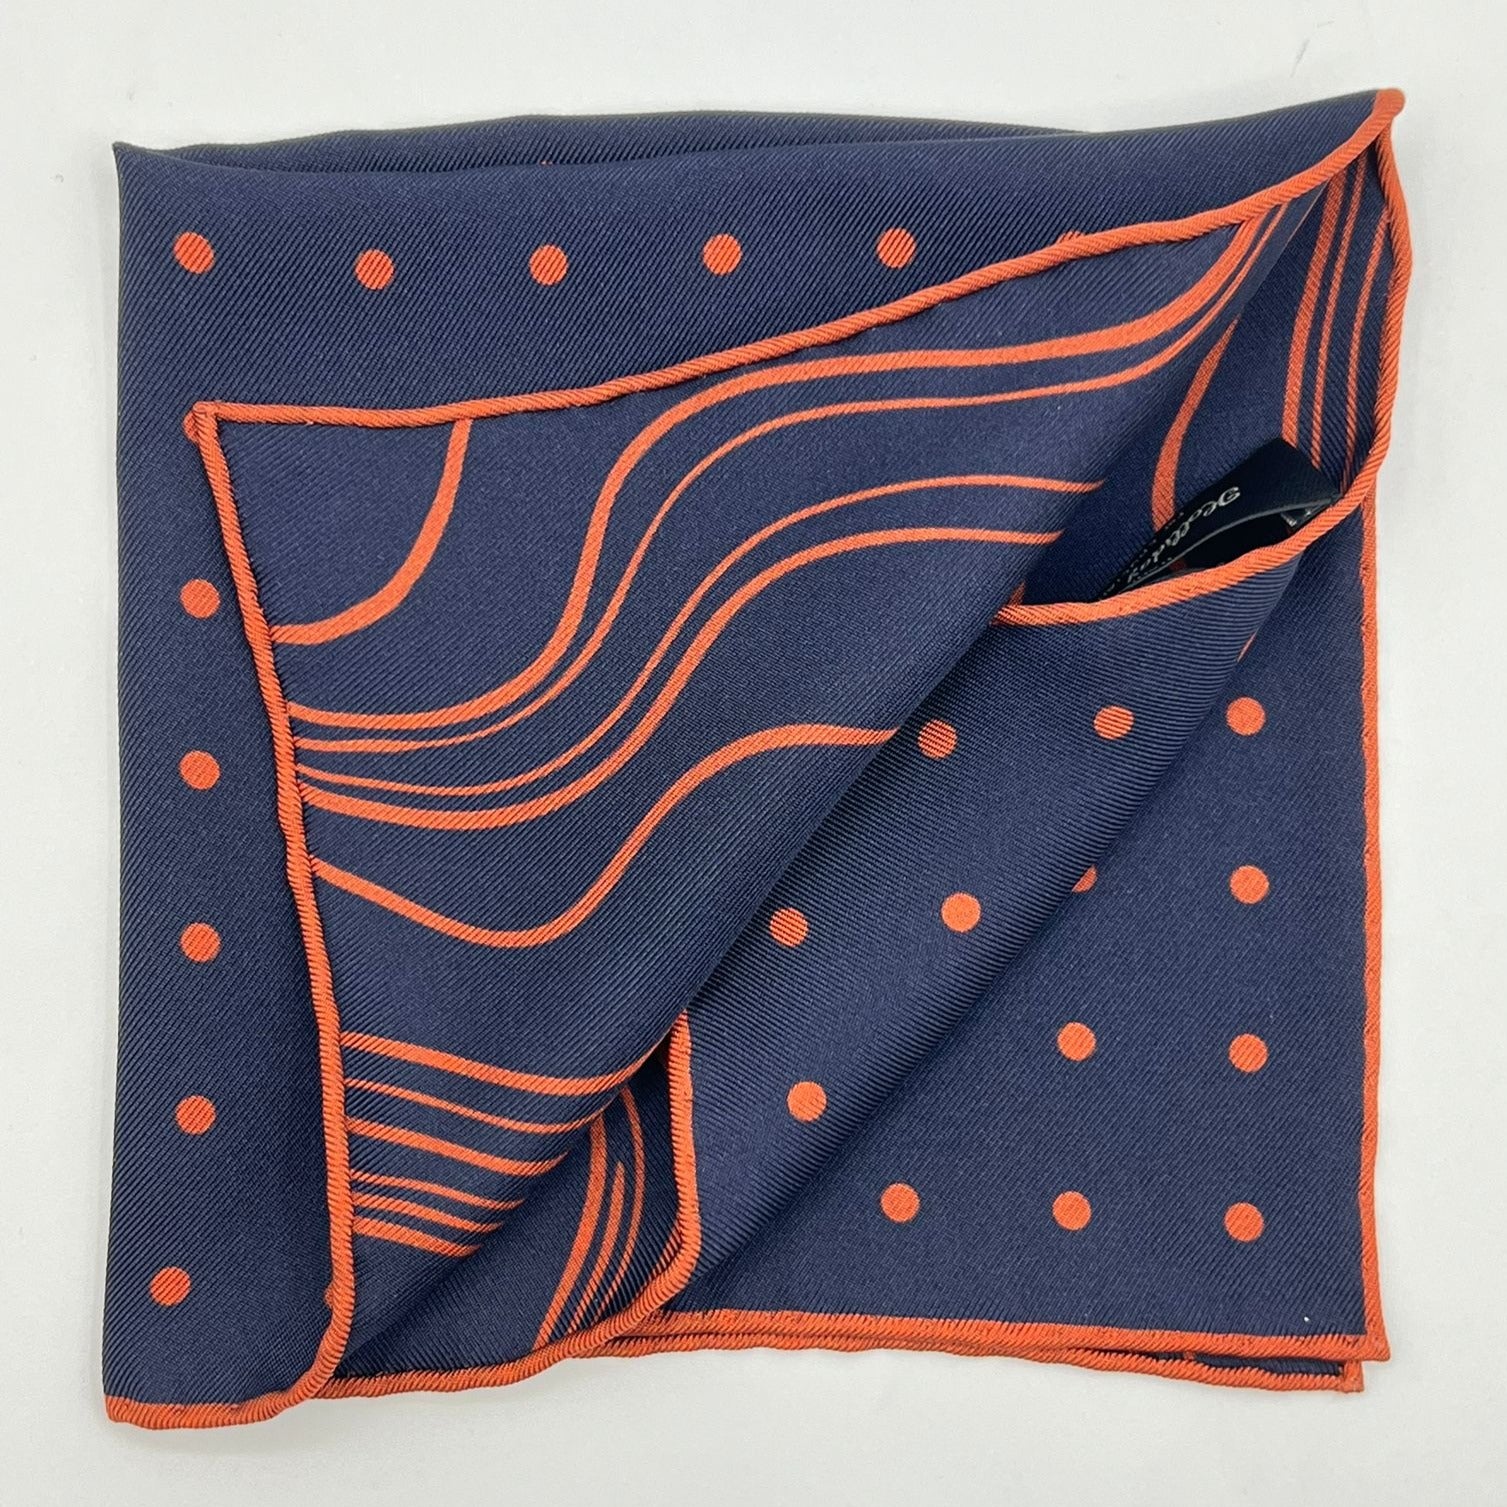 Holliday & Brown Hand-rolled   Holliday & Brown for Cruciani & Bella 100% Silk Blue and Brick Double Faces Dots Motif  Pocket Square Handmade in Italy 32 cm X 32 cm